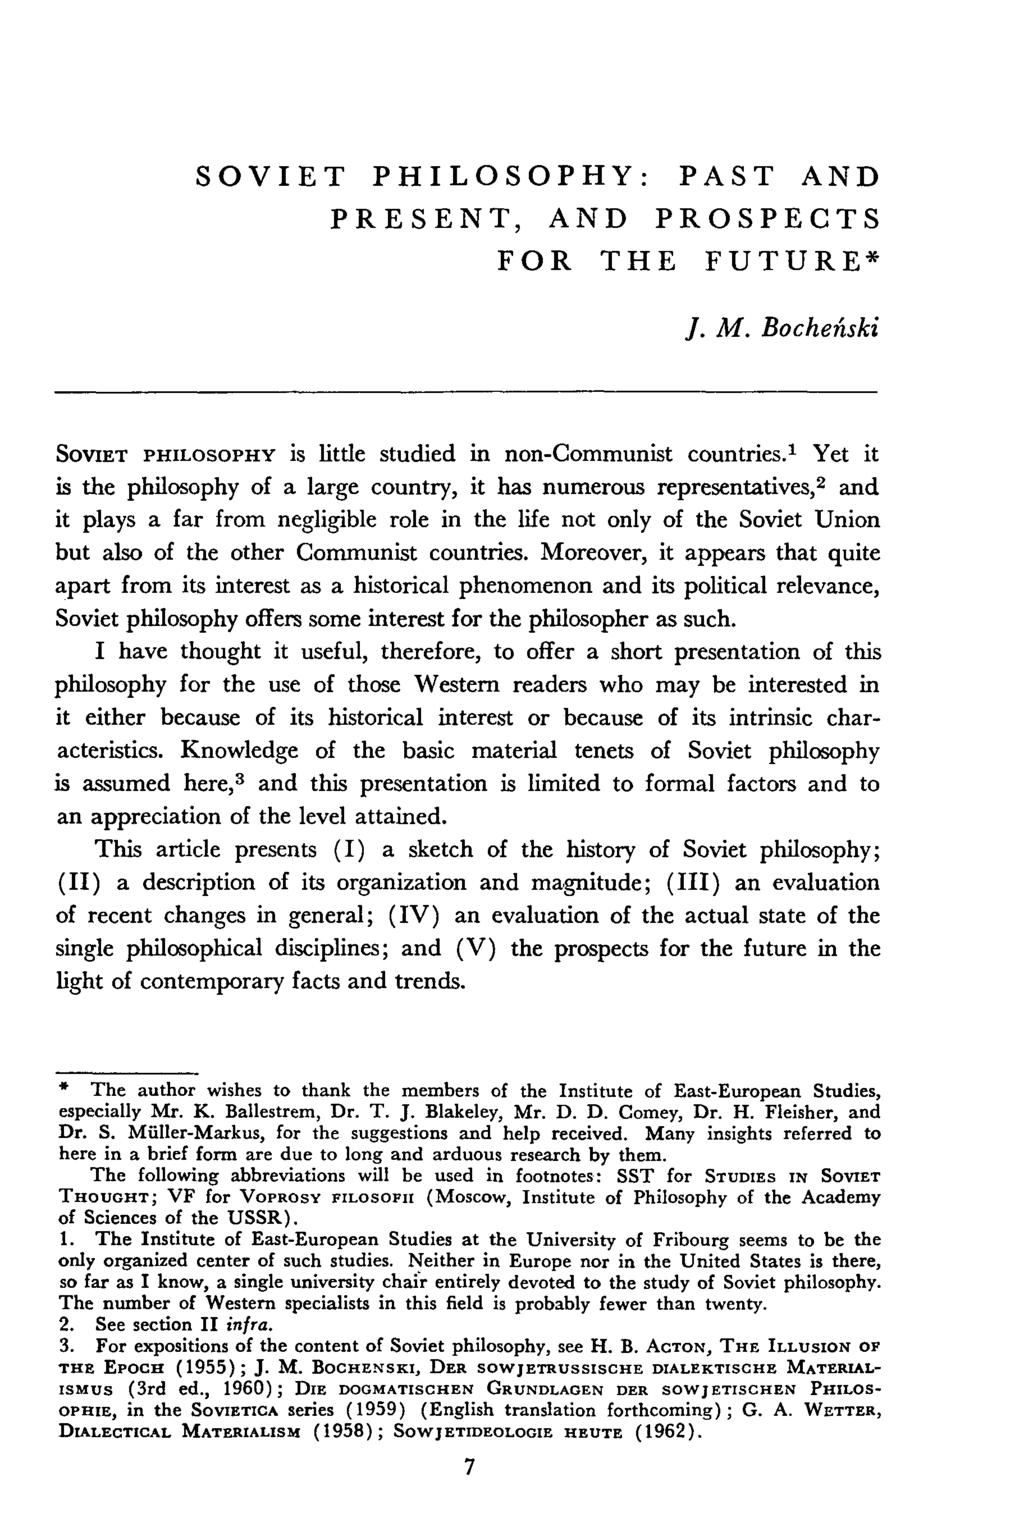 SOVIET PHILOSOPHY: PAST AND PRESENT, AND PROSPECTS FOR THE FUTURE* ]. M. Bochen'ski SOVIET PHILOSOPHY is little studied in non-communist countries.